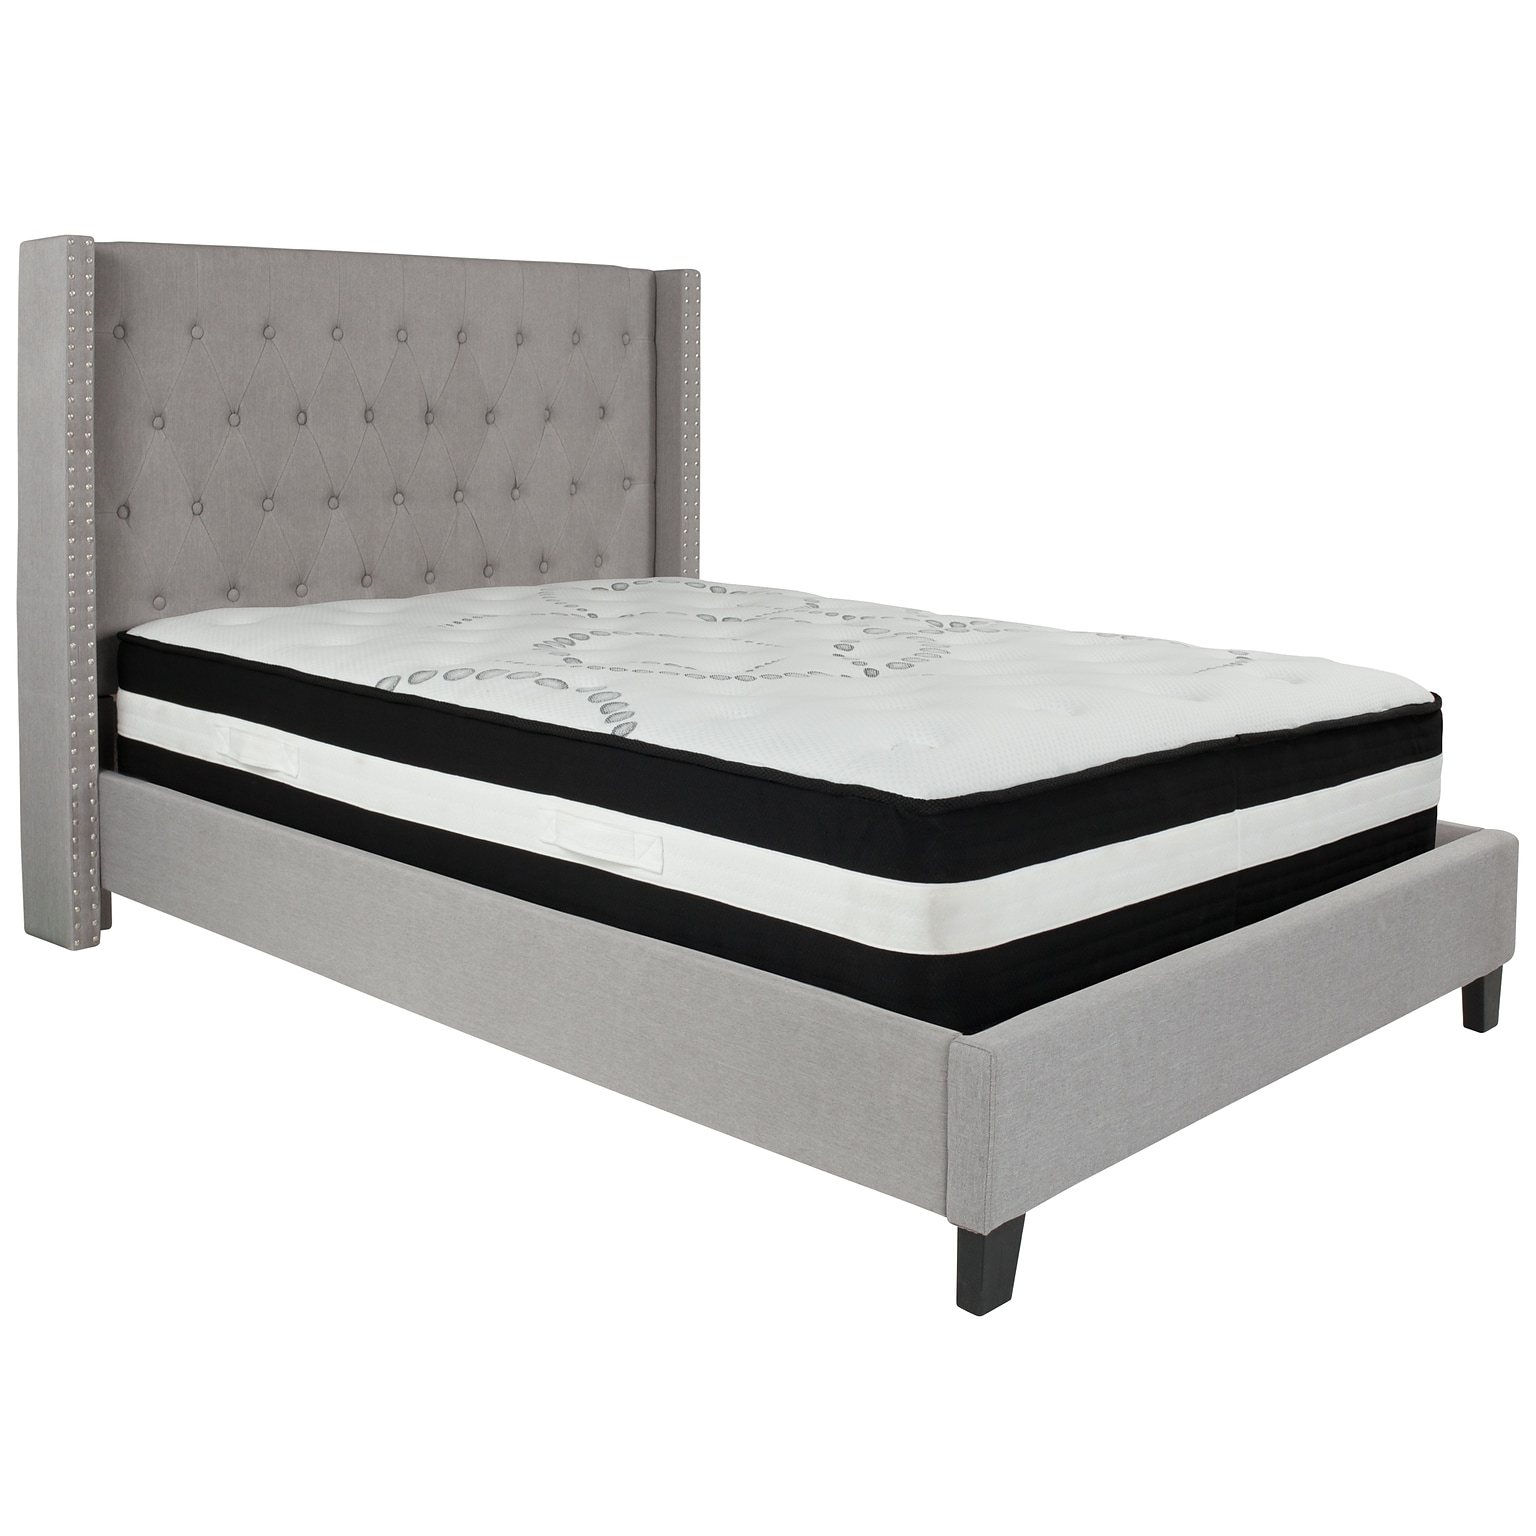 Flash Furniture Riverdale Tufted Upholstered Platform Bed in Light Gray Fabric with Pocket Spring Mattress, Full (HGBM42)